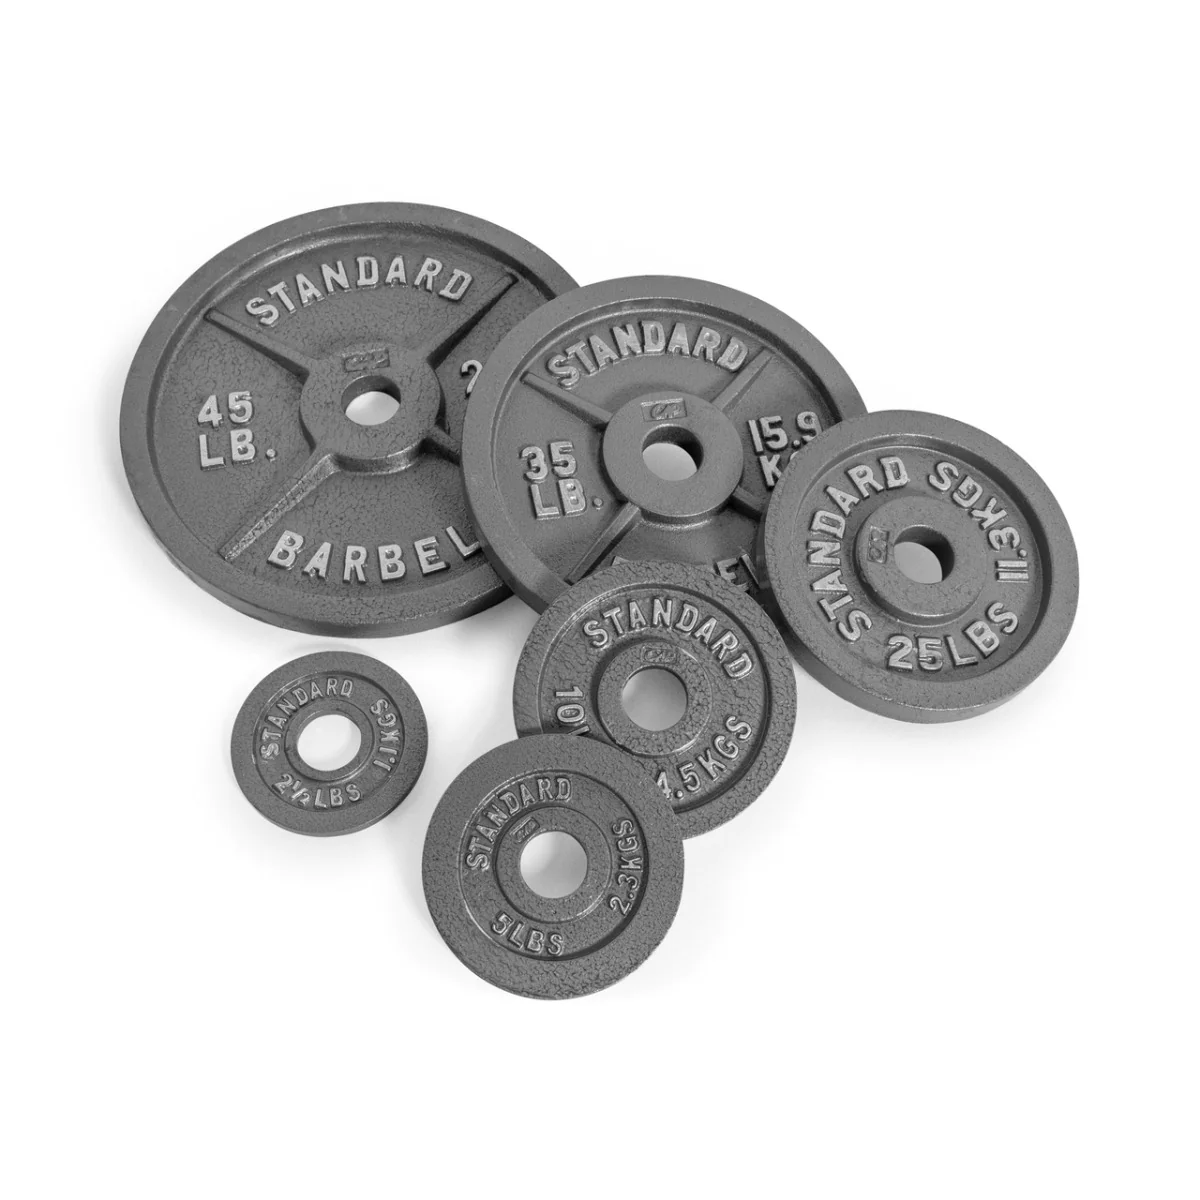 5 Lbs Total Home Gym Lifting 2 CAP 2.5lb Standard 1” for barbell Weight Plates 